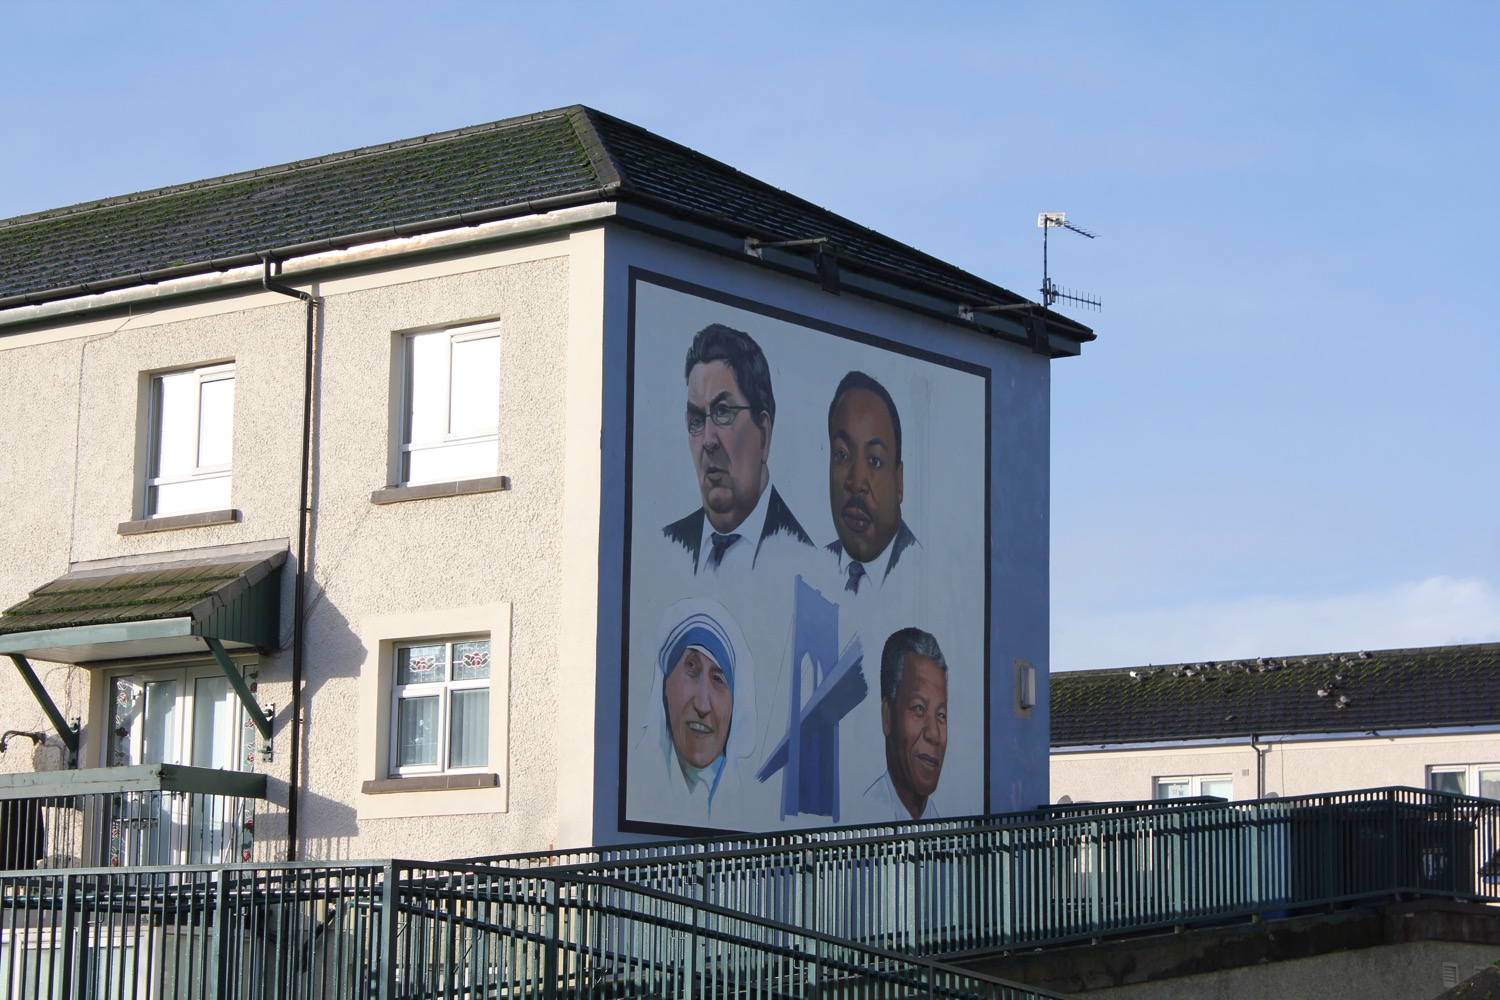 a building with a mural of men on it